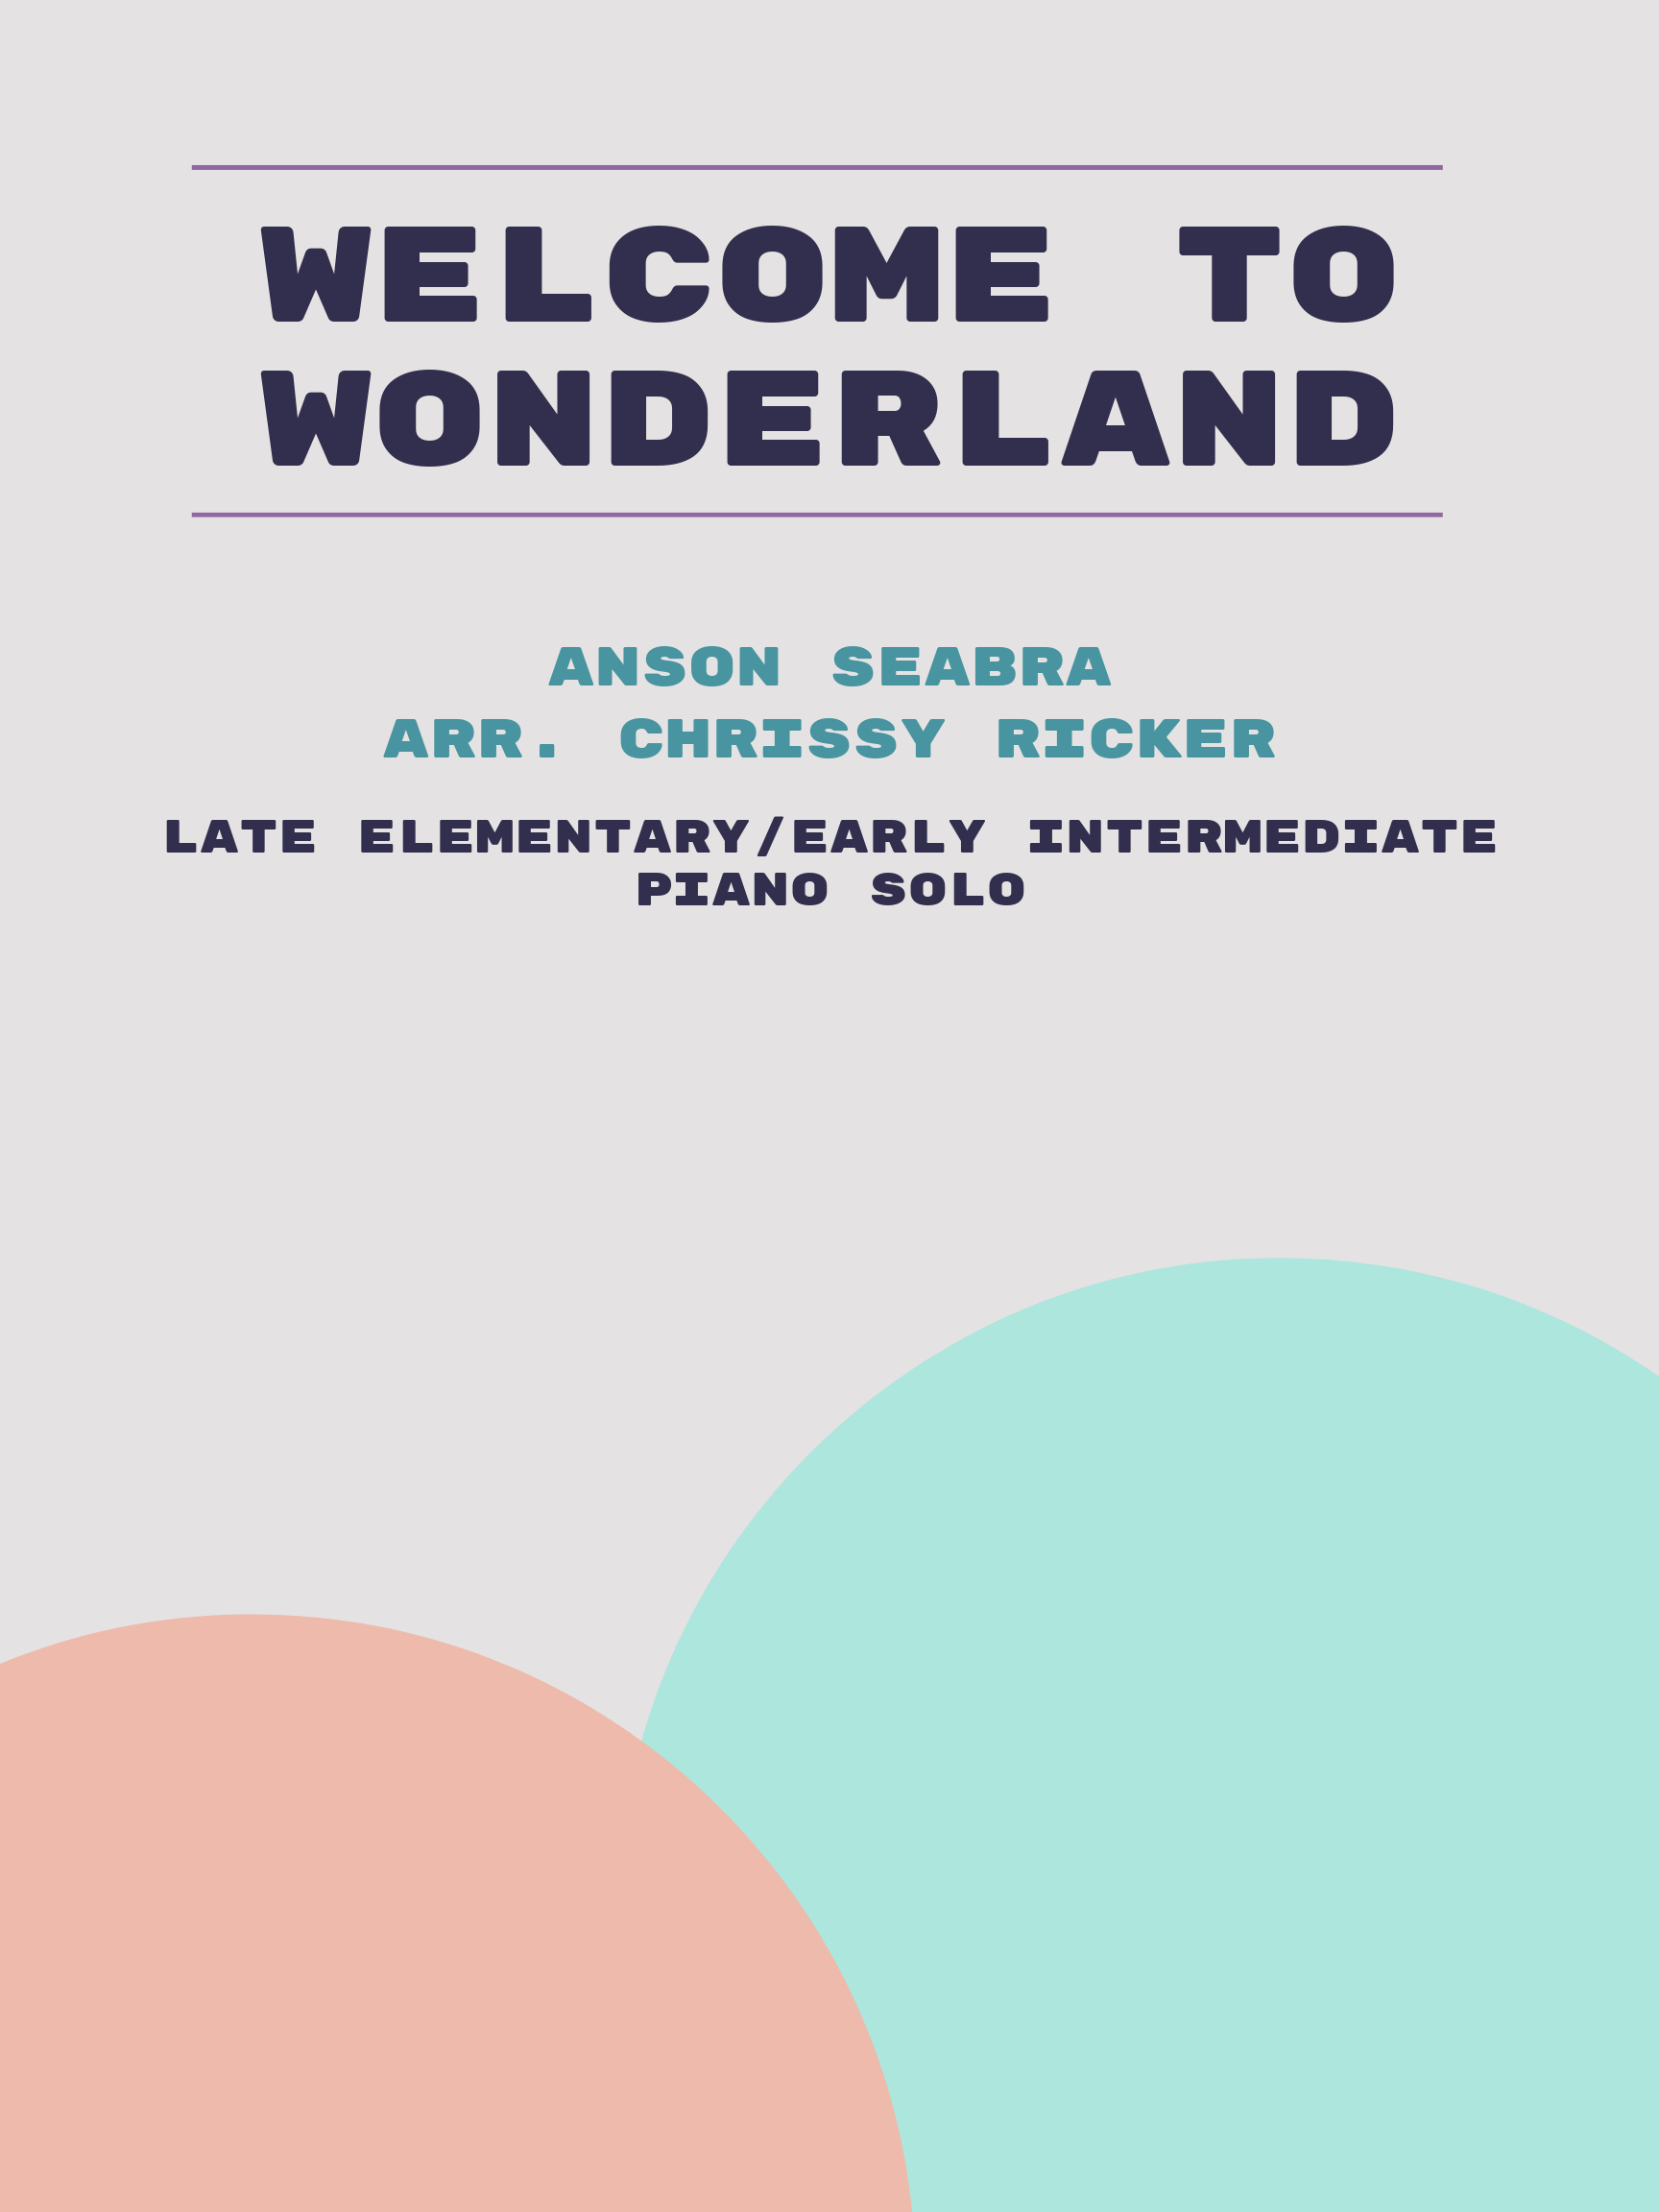 Welcome to Wonderland by Anson Seabra